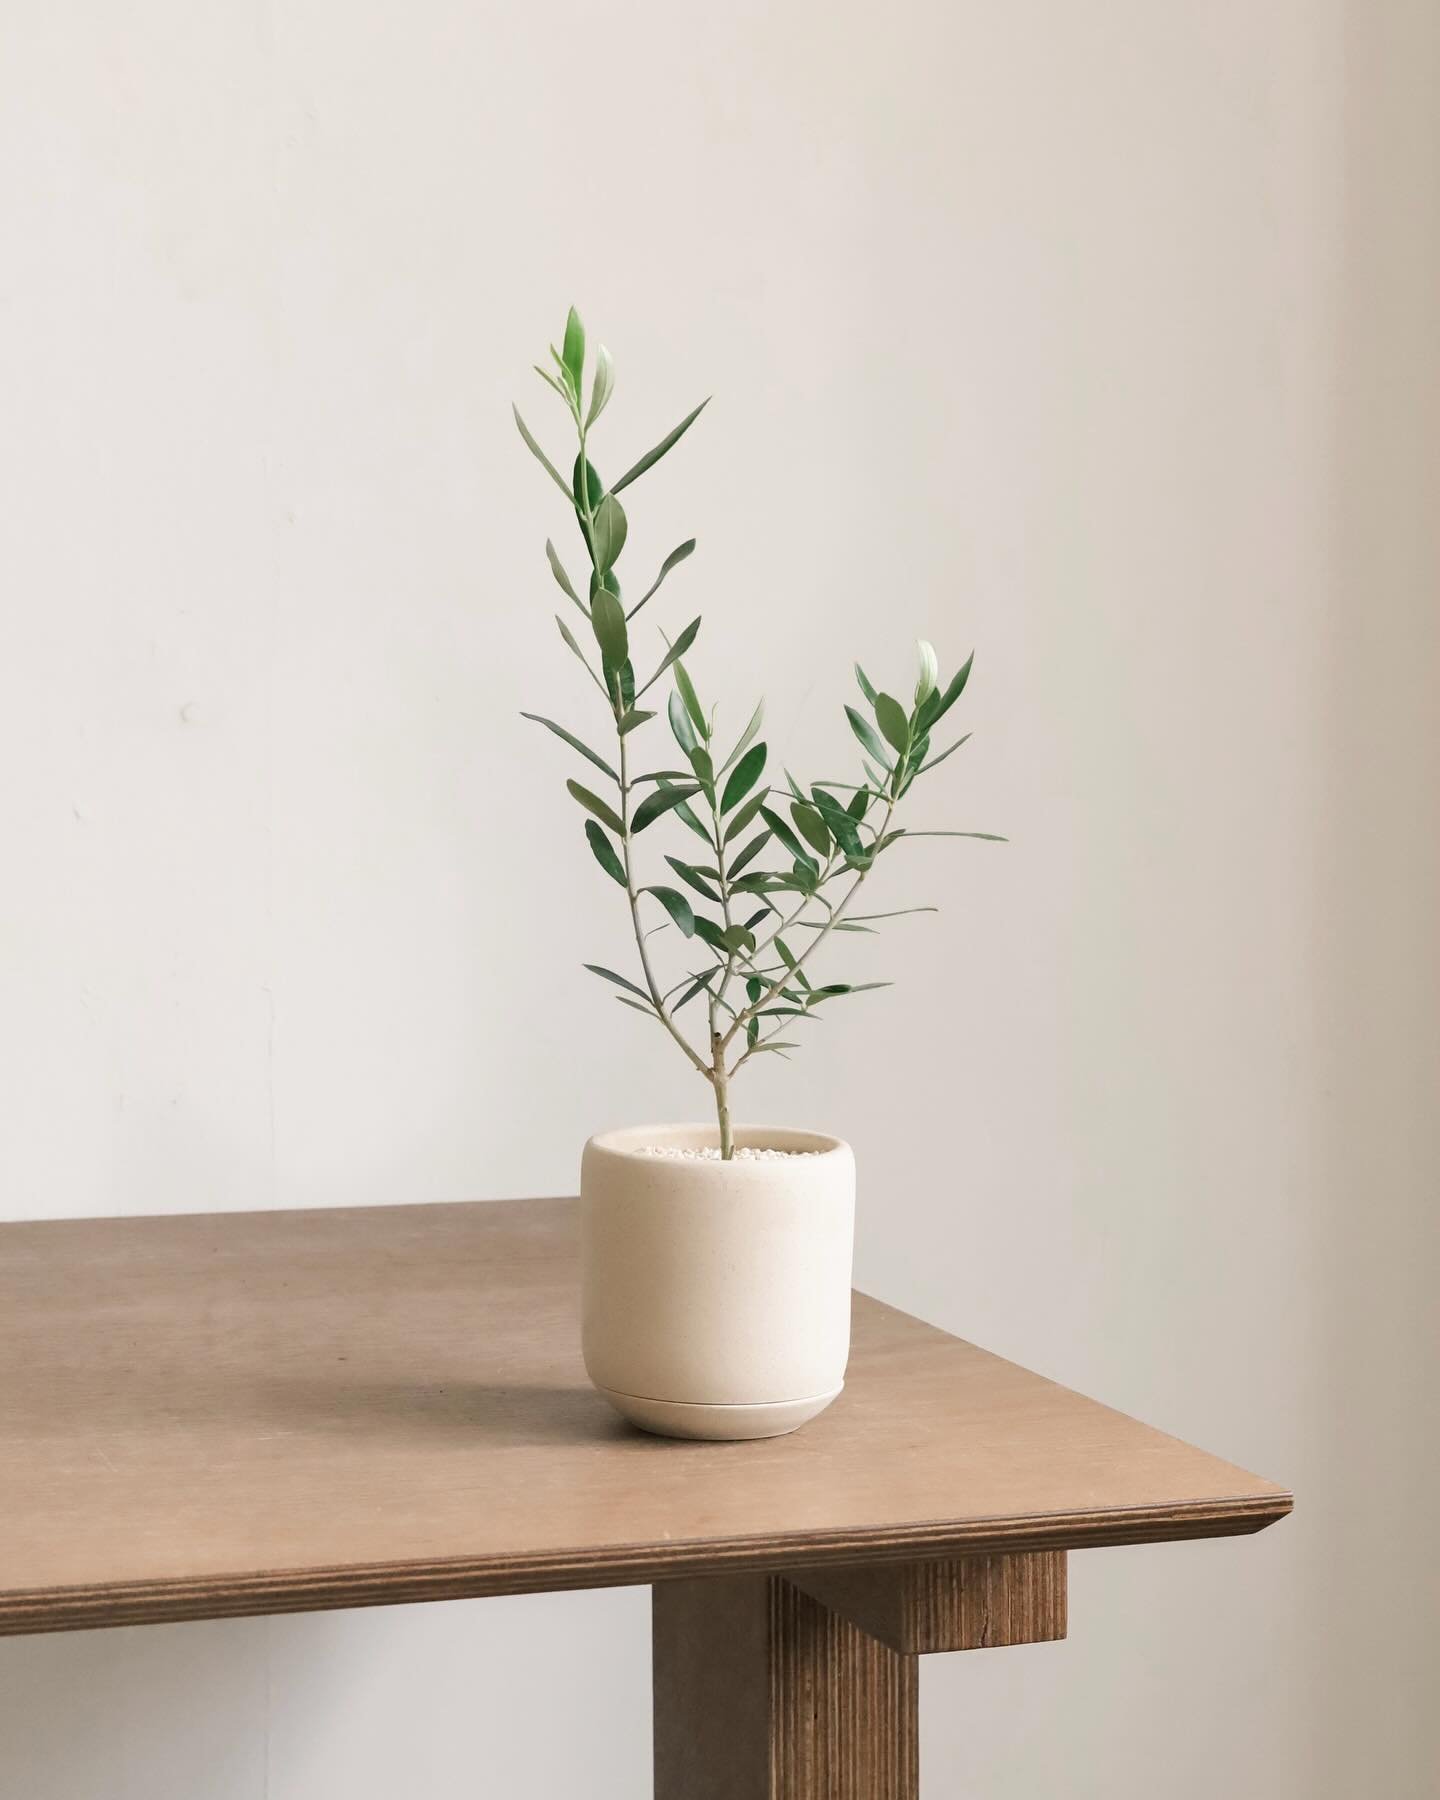 The Japanese olive tree: a symbol of peace &amp; friendship, perfect for housewarming gifts.🏡 

Can they bear fruit indoors? Chances are slim, placing them outdoors with direct sunlight mimics their natural climate, offering a chance for fruiting. ?